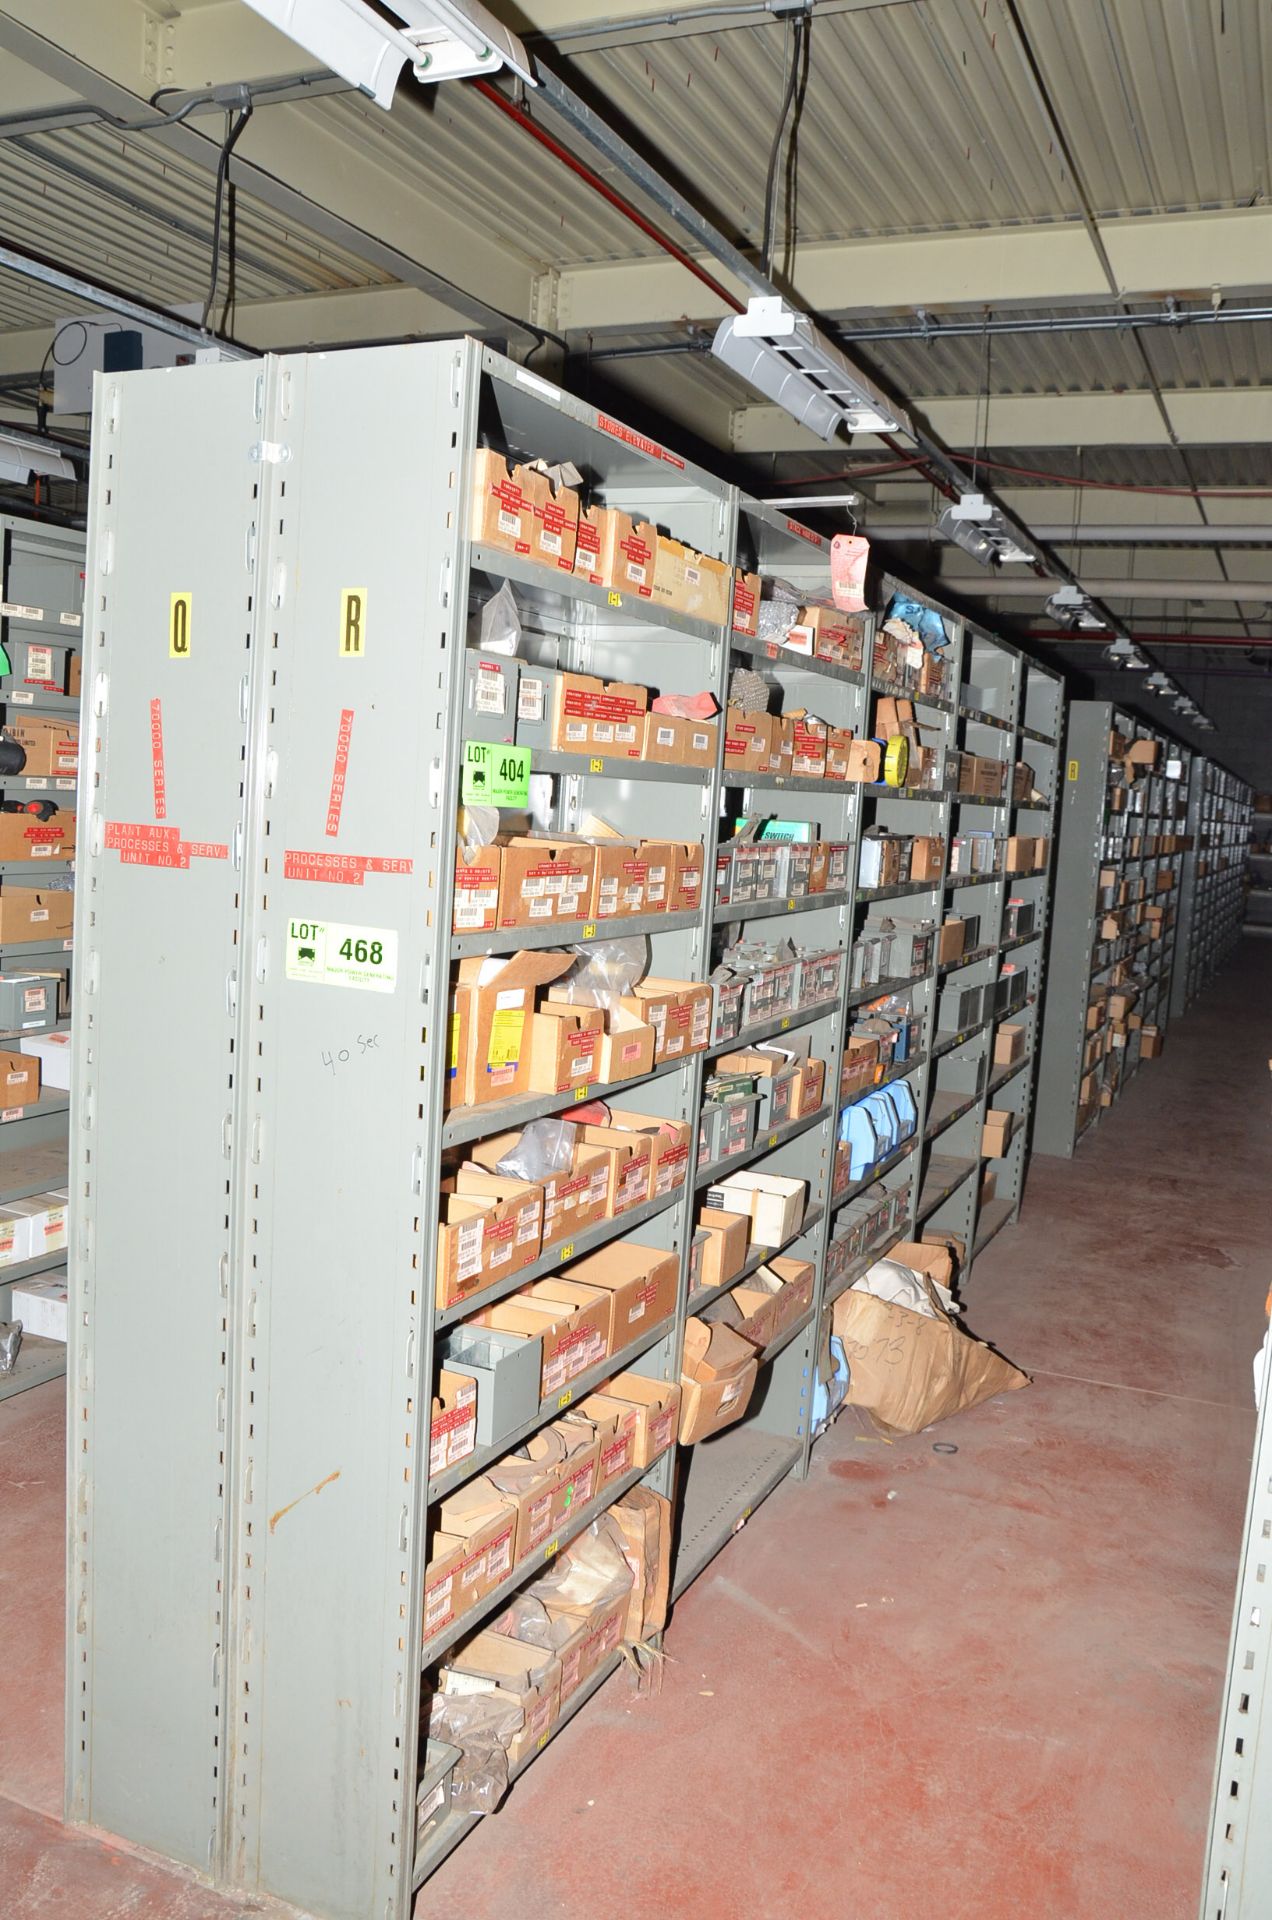 LOT/ (40) SECTIONS METAL SHELVING - NO CONTENTS - DELAY DELIVERY [RIGGING FEE FOR LOT #468 - $TBD